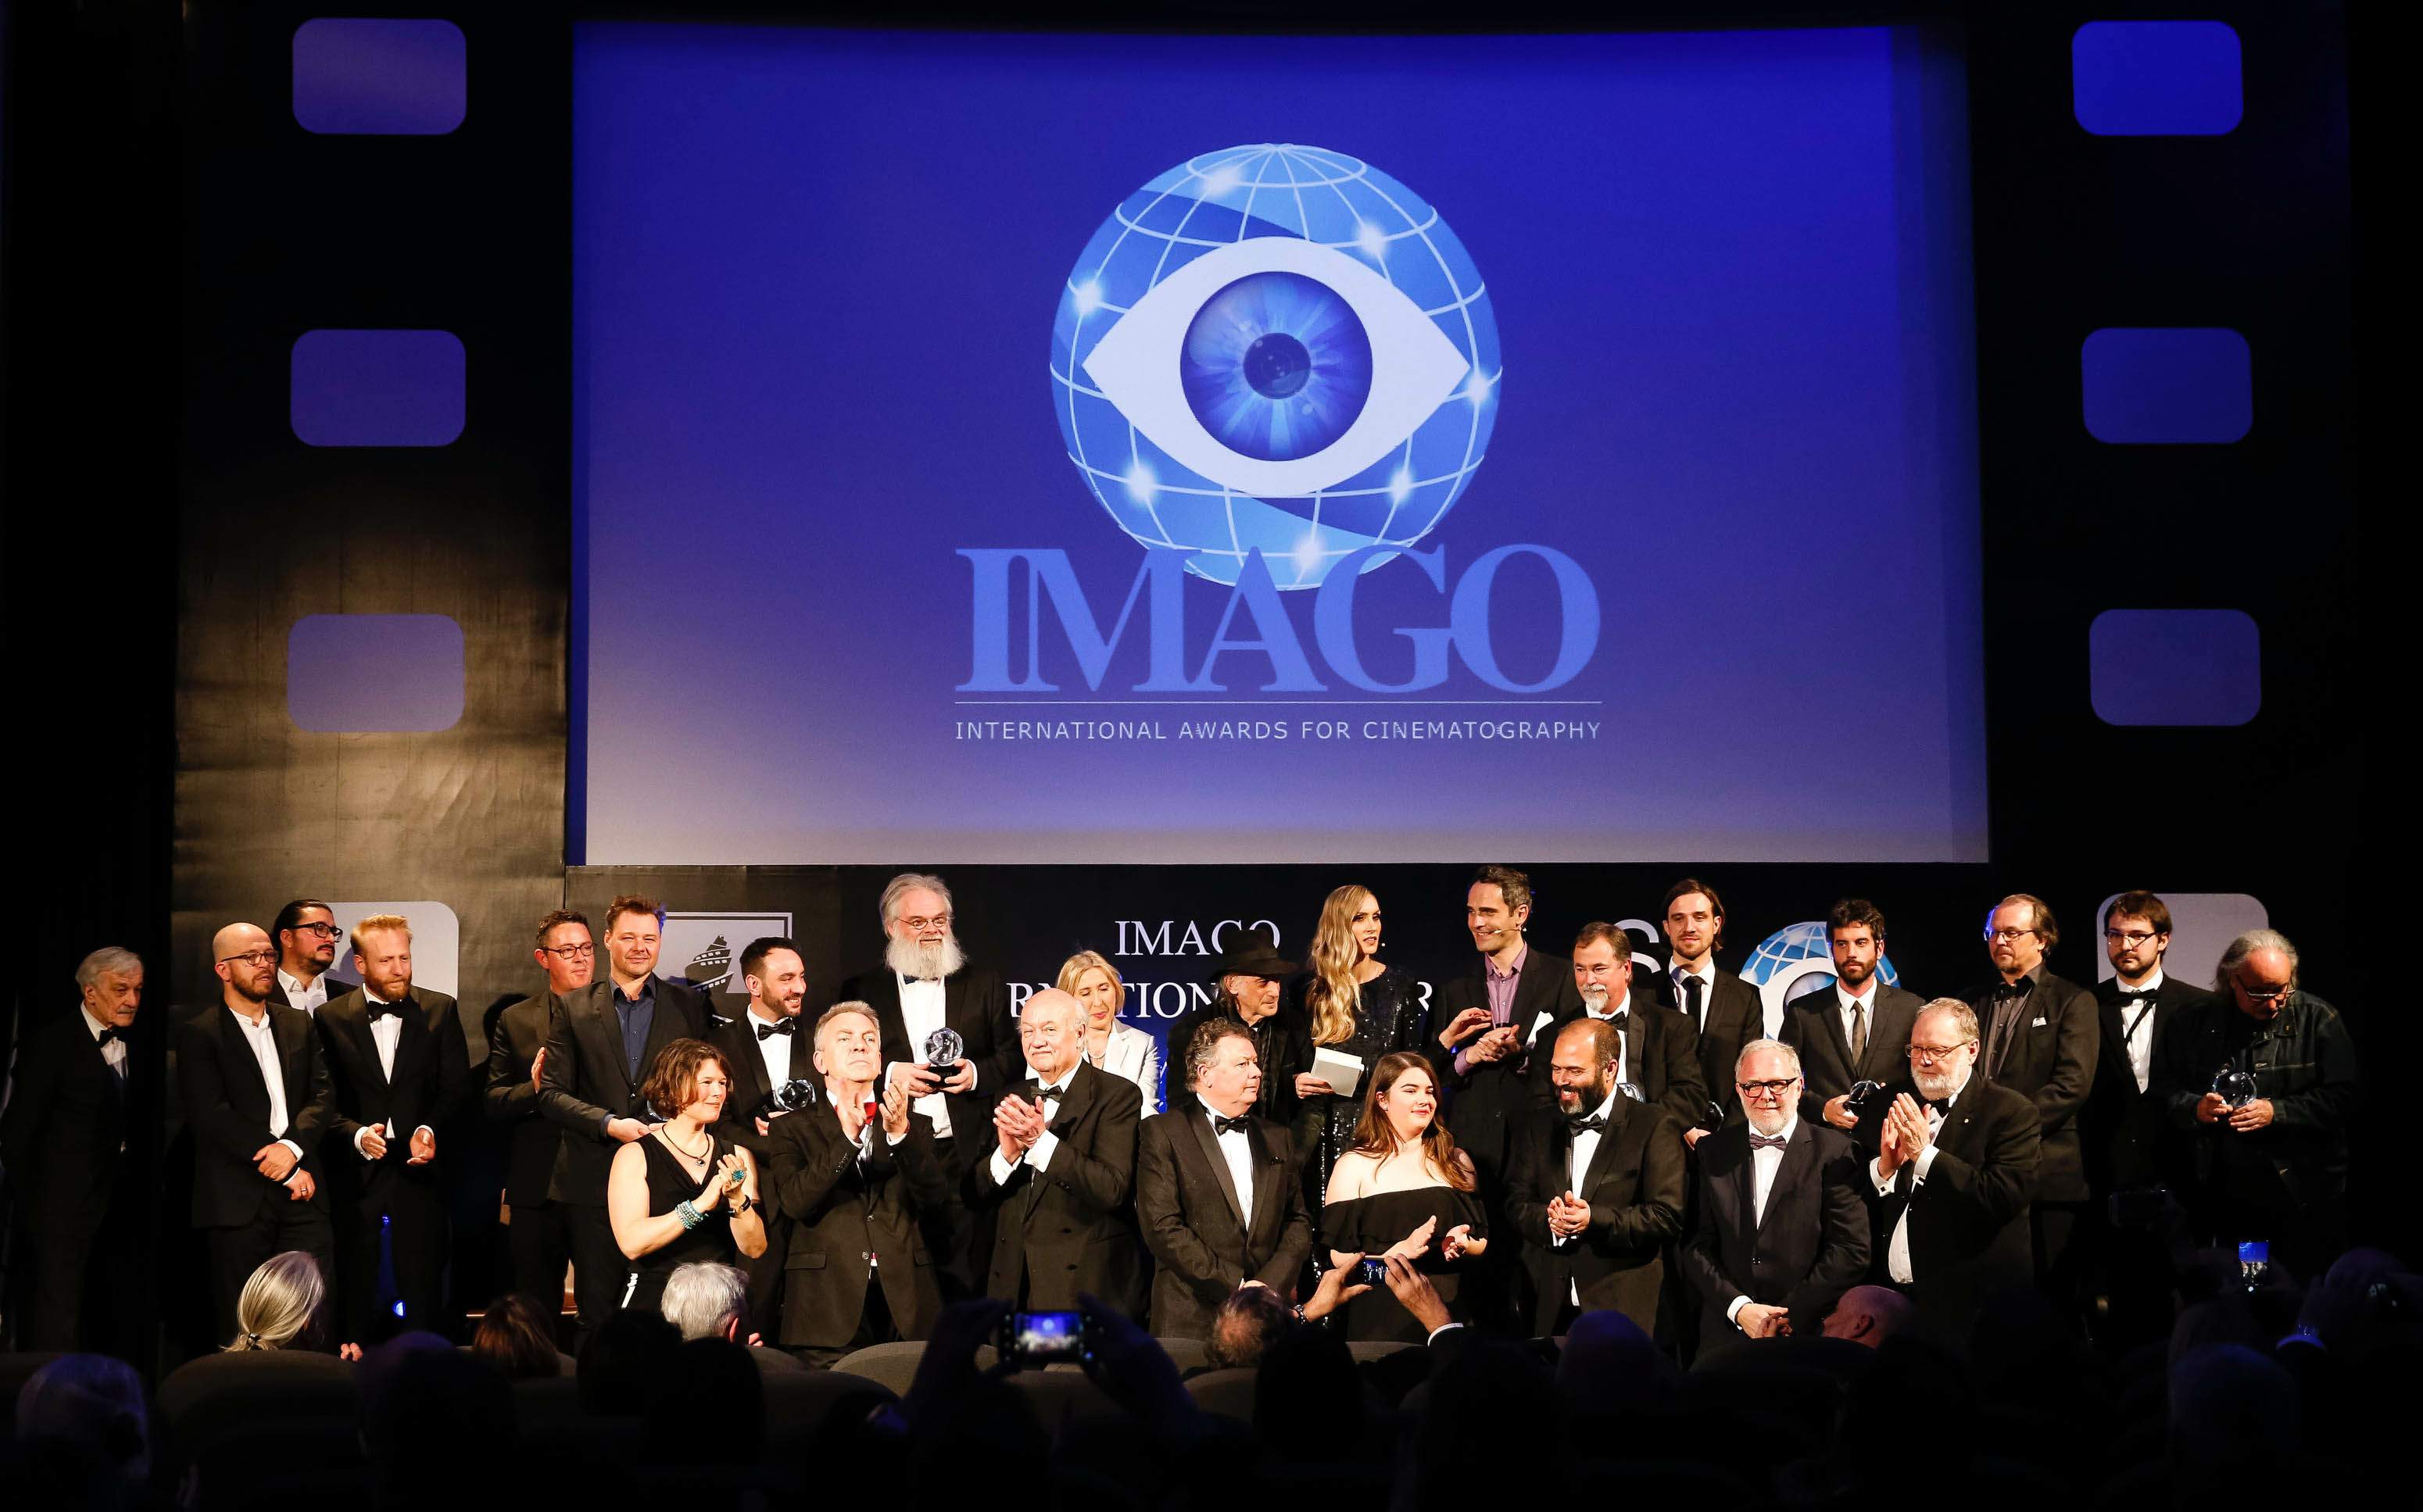 Group photo of 2019 Imago Award winners, nominees and organisers